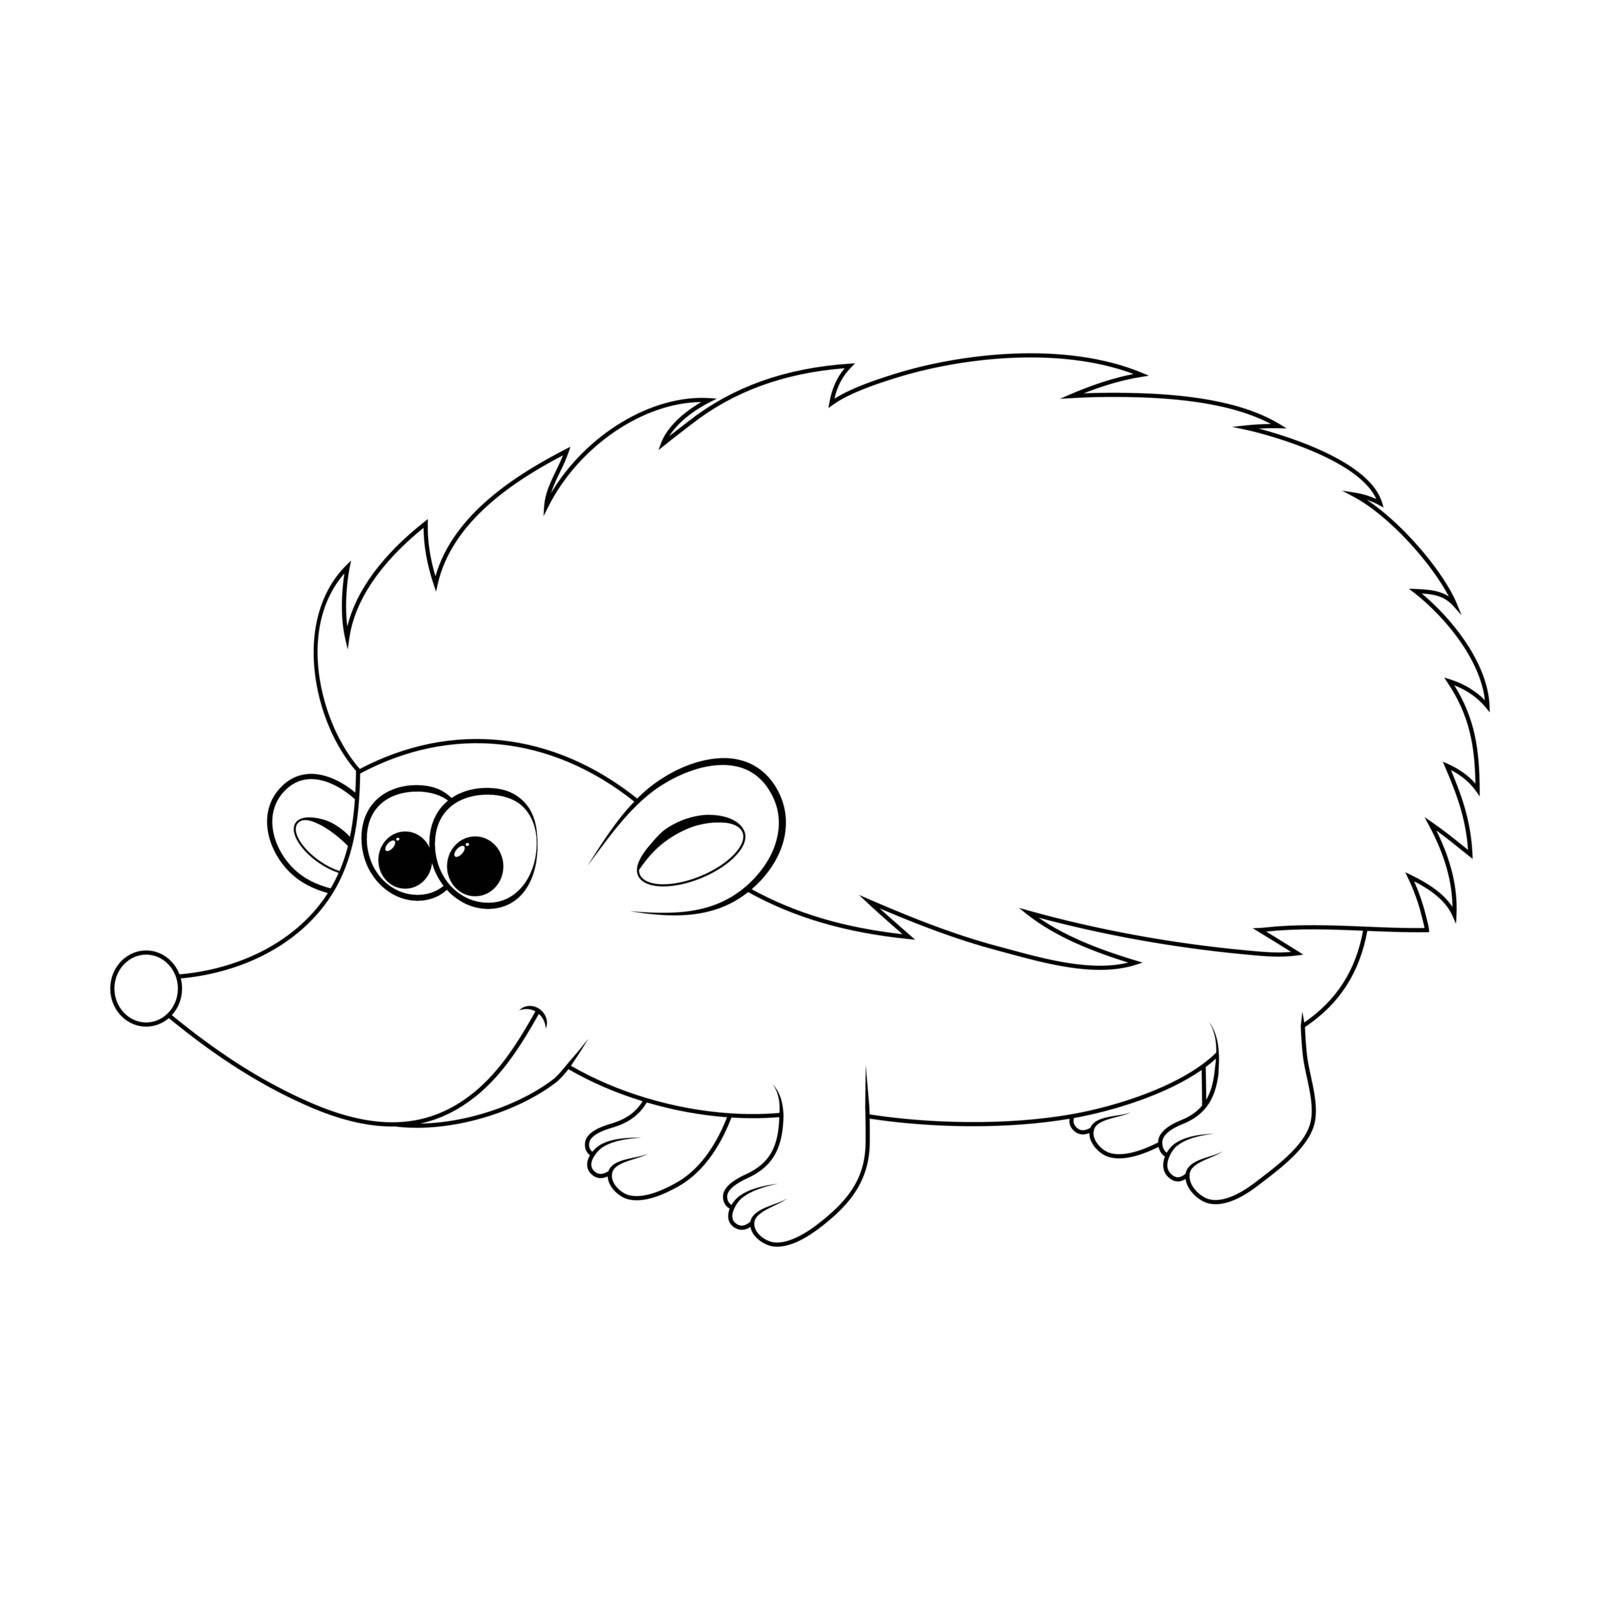 Hedgehog outline isolated on white. Contour autumnal shape for kids. Vector smiling animal for autumn design.  Cartoon happy pet illustration. Funny mammal mascot with sharp spikes. 